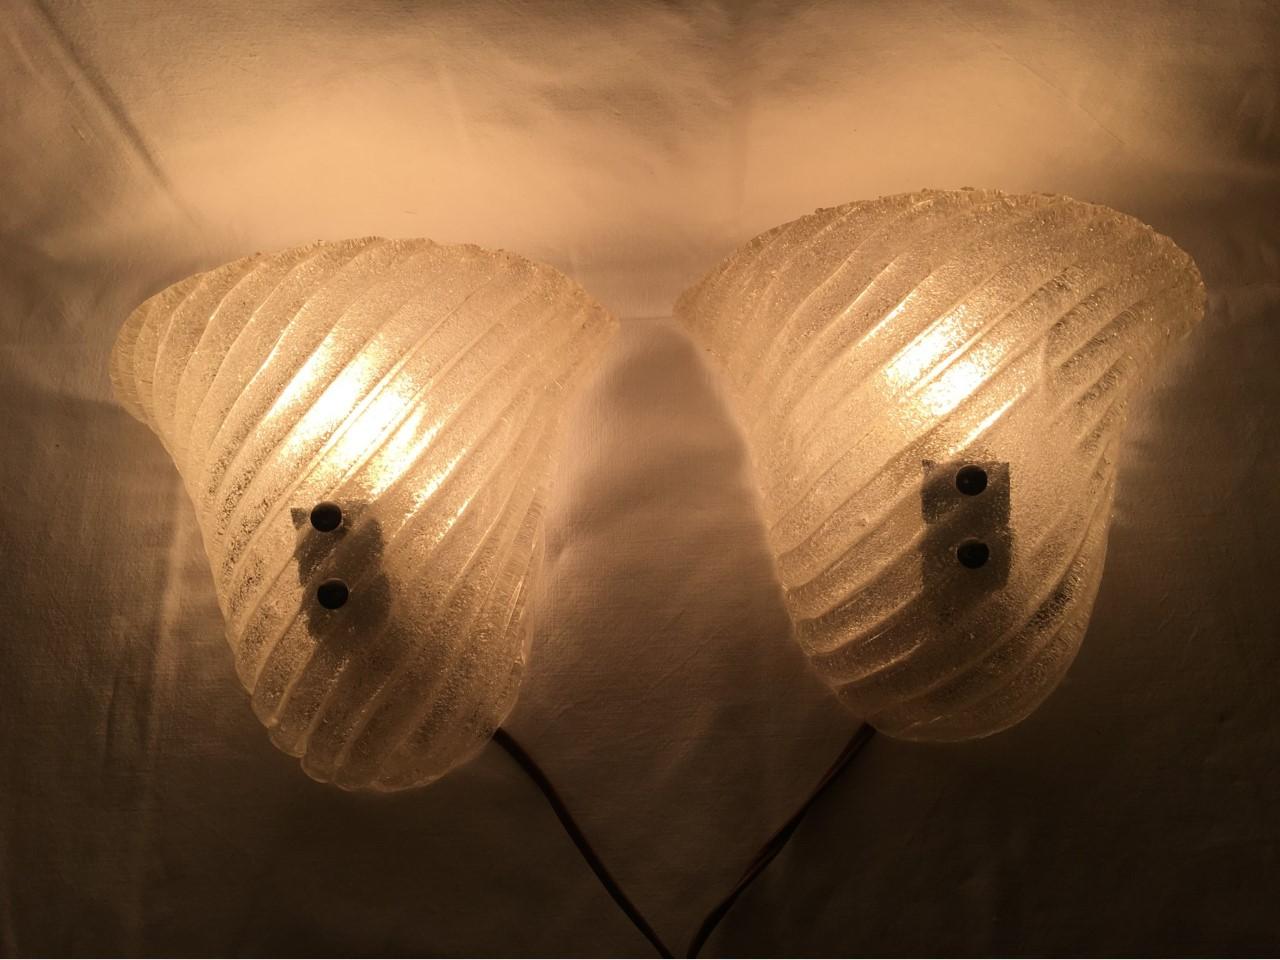 A charming, very nice pair of Italian Murano glass striped ice glass sconces in the style of Barovier and Toso. They definitely reflect the chic Murano glass lighting of the 1960s. Each fixture requires one European style E 27 candelabra style bulb